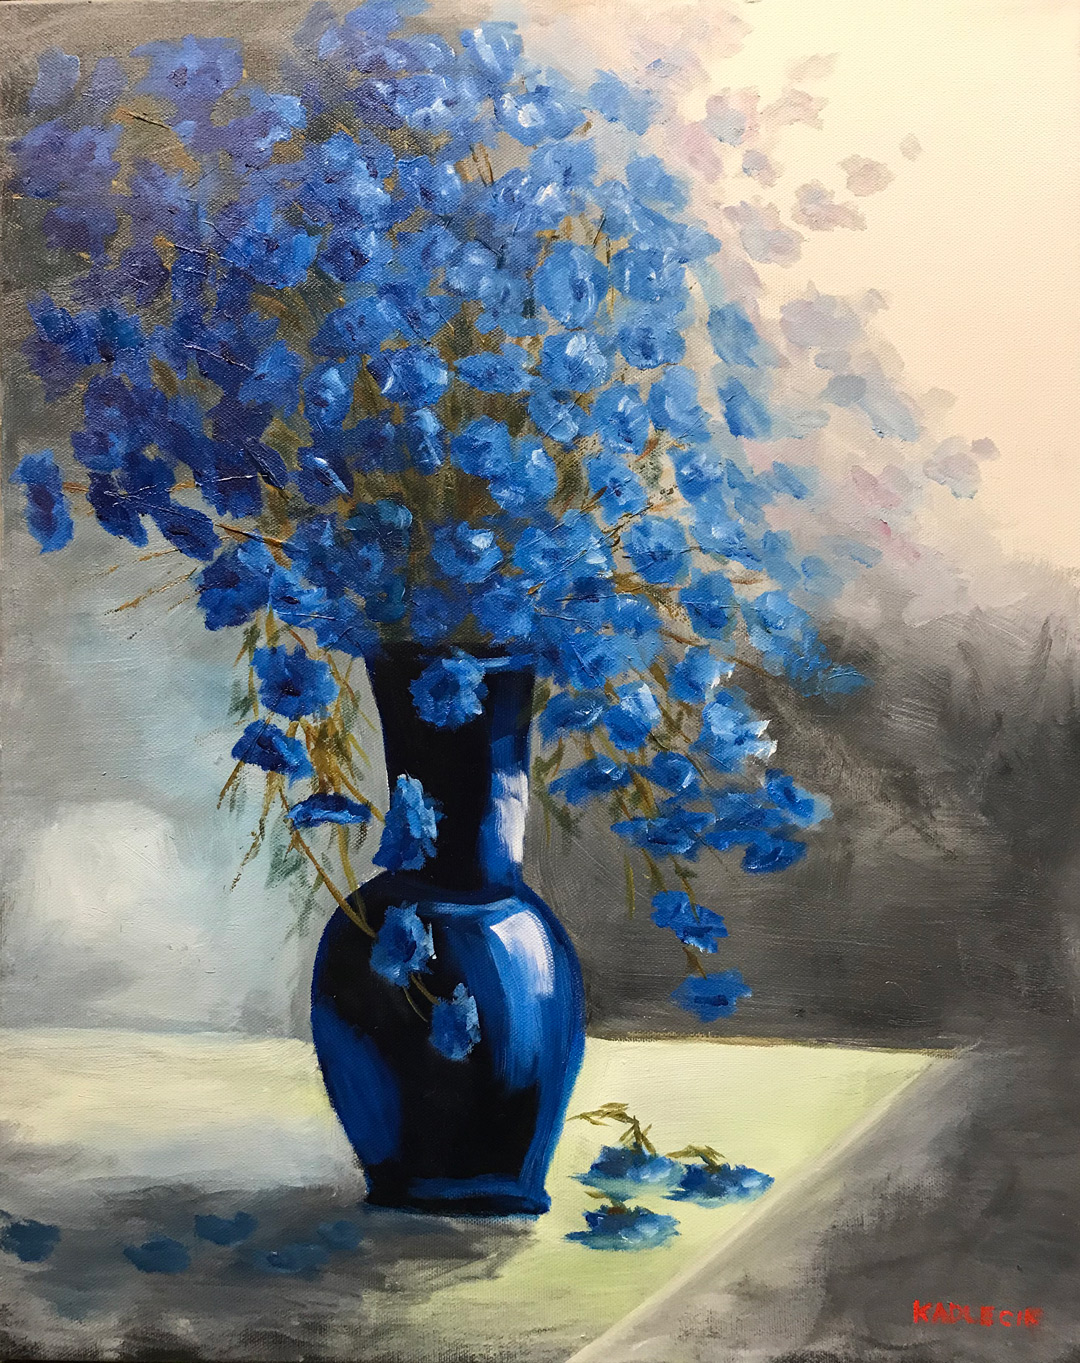 A blue vase filled with blue blossoms on a table.